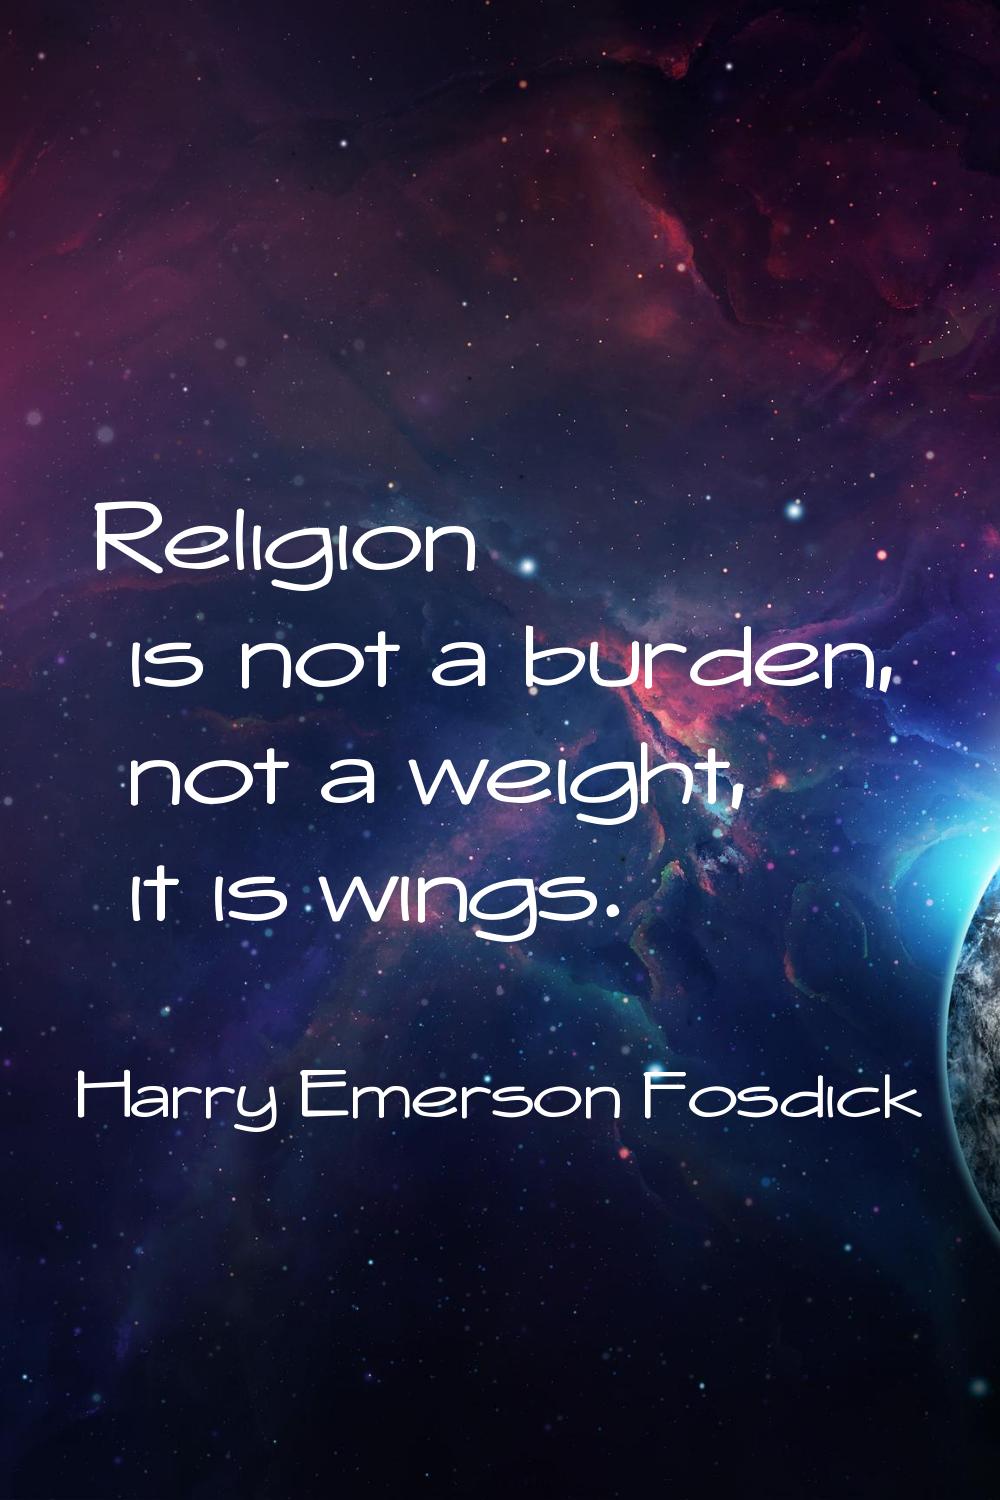 Religion is not a burden, not a weight, it is wings.